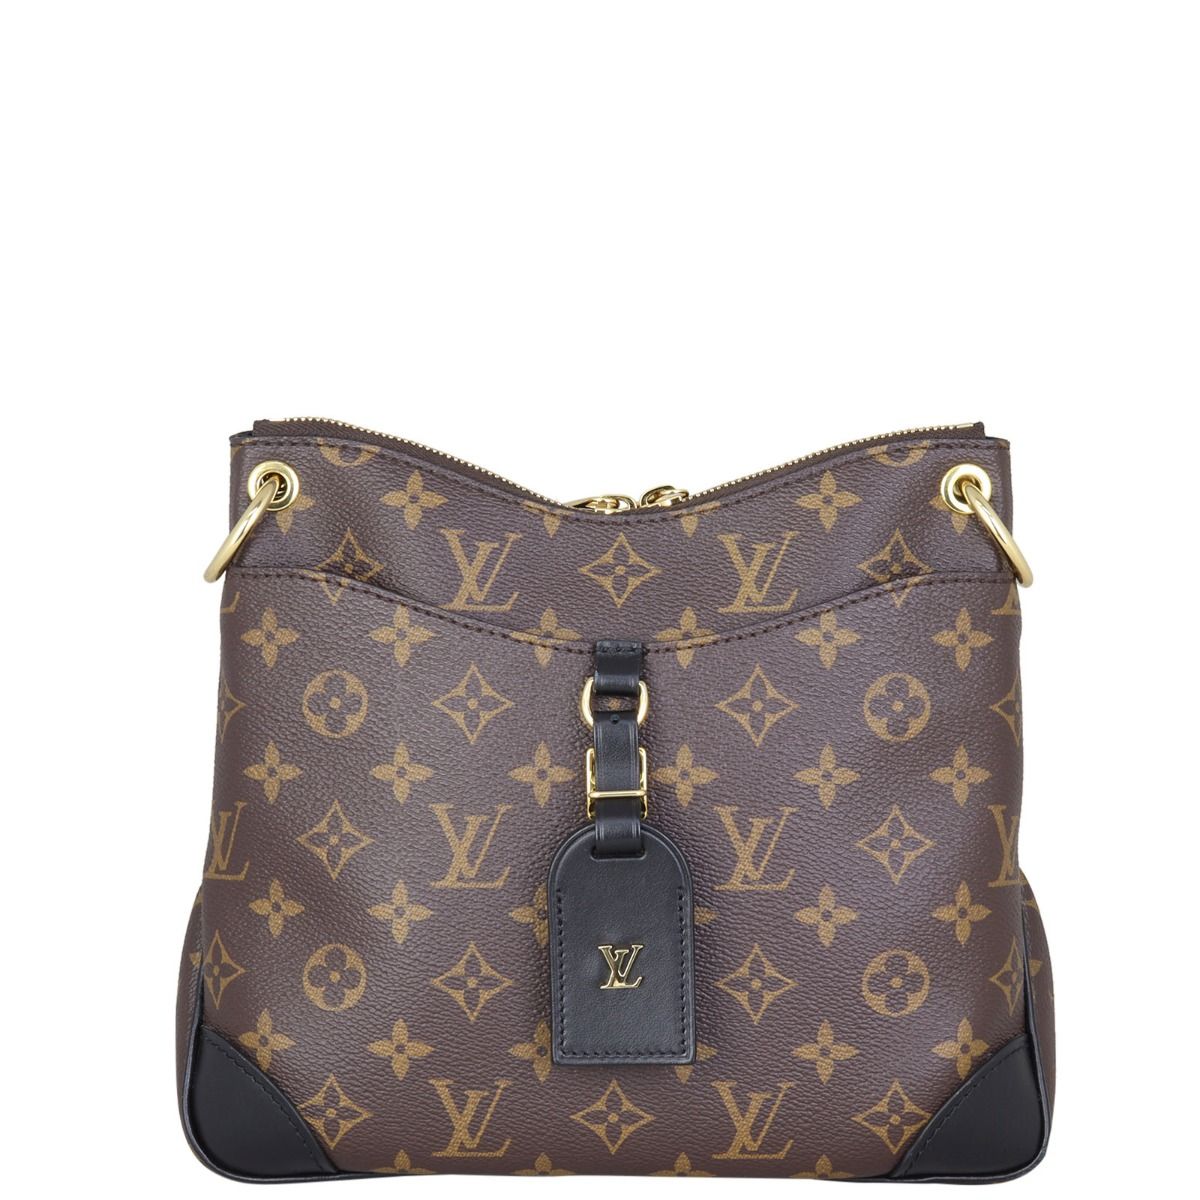 Louis Vuitton Odeon PM Monogram Canvas Shoulder Bag with Luggage Tag